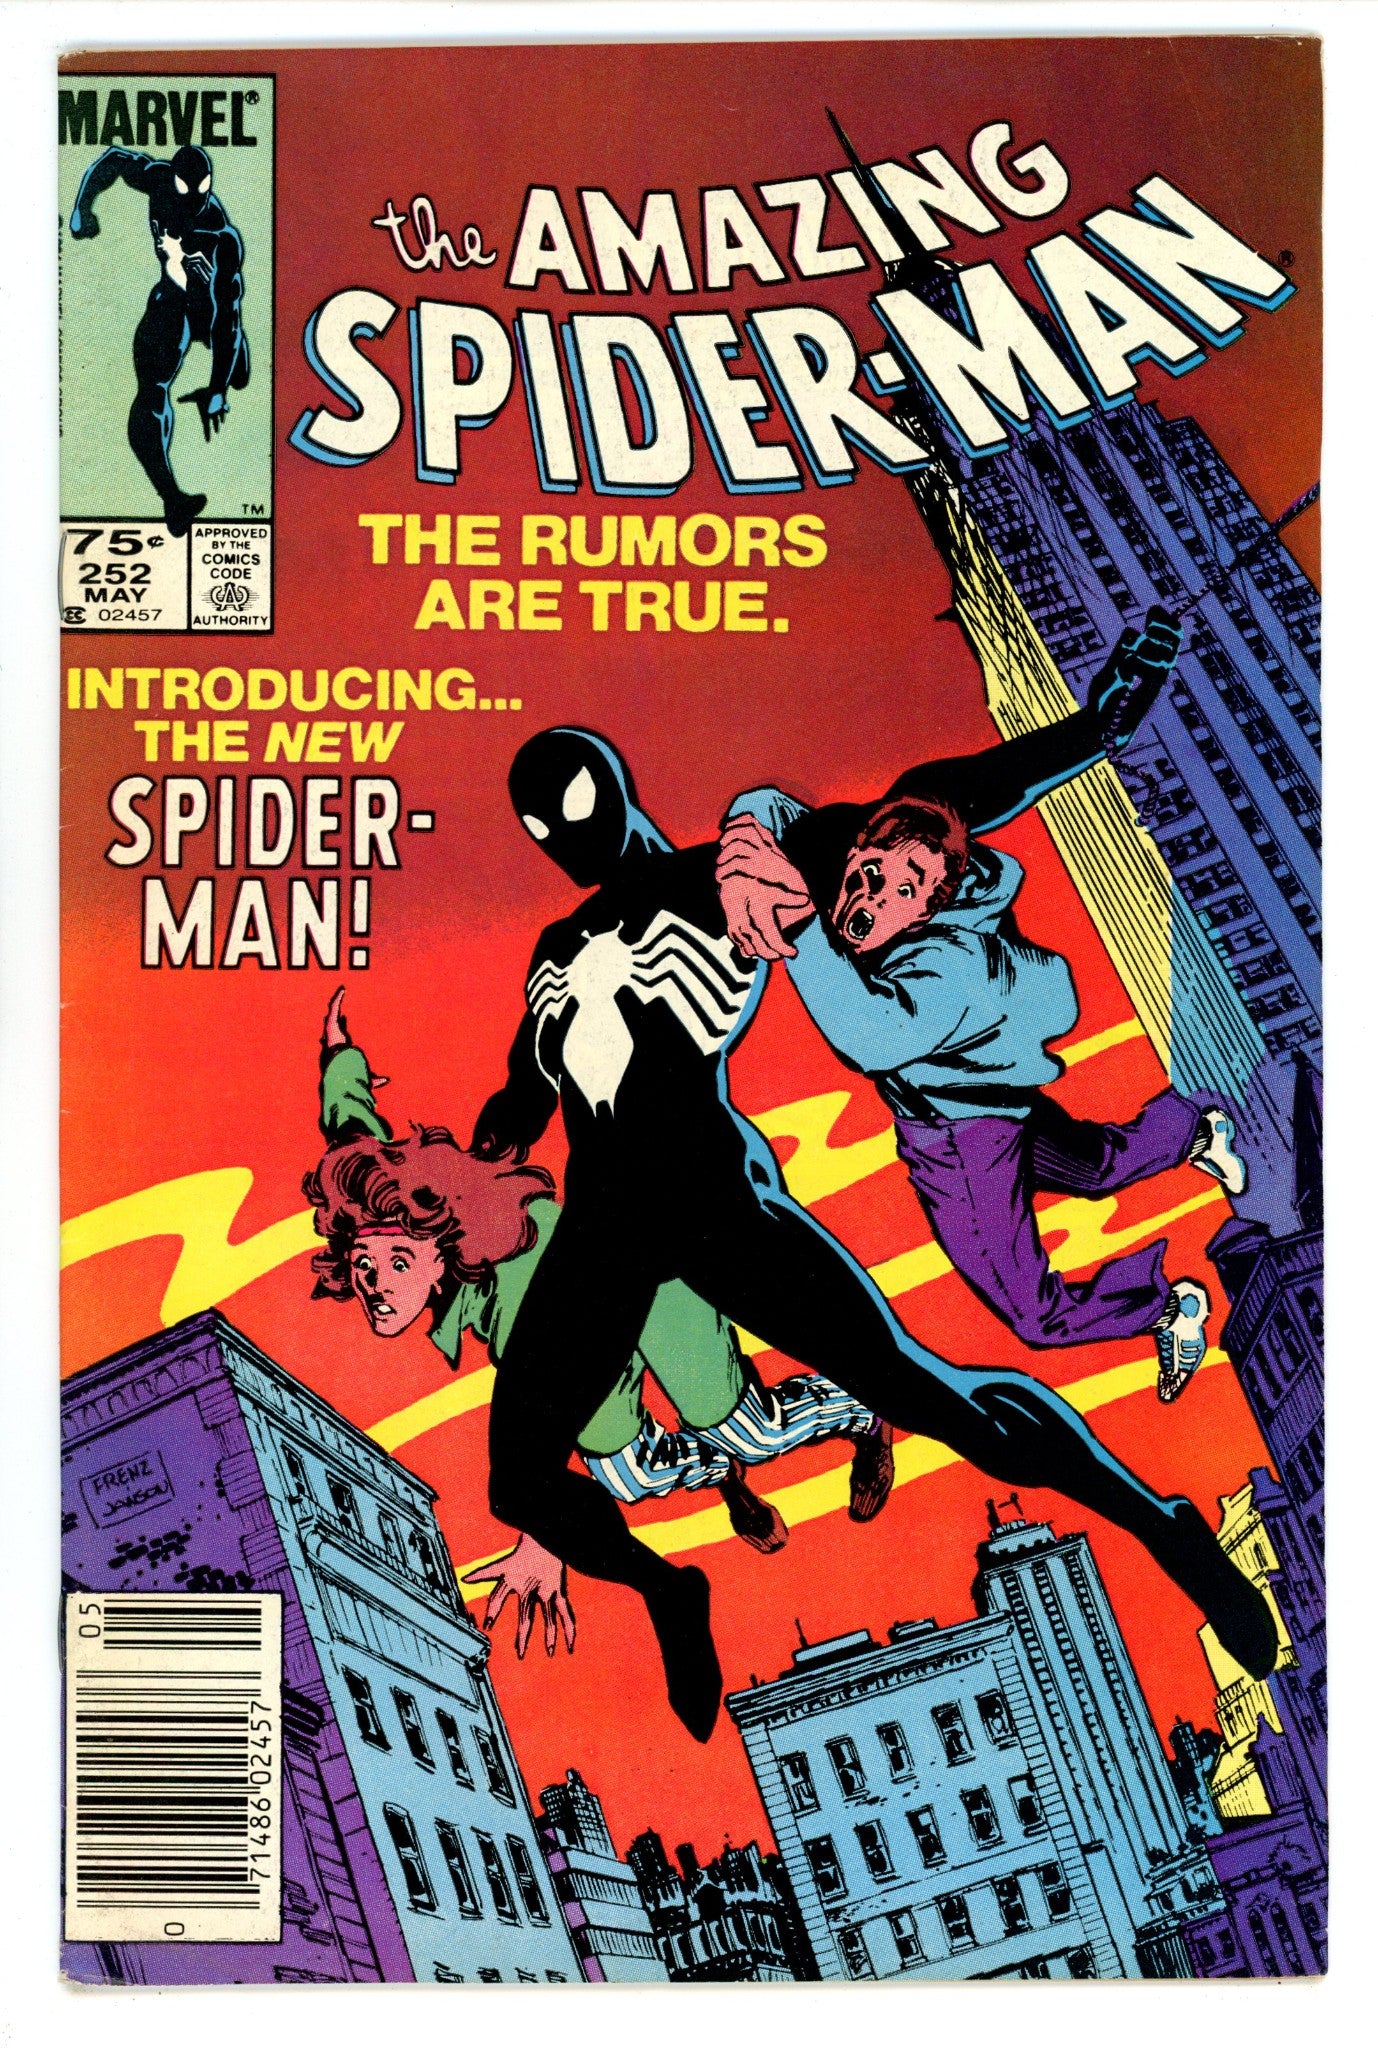 The Amazing Spider-Man Vol 1 252 FN (6.0) (1984) Canadian Price Variant 